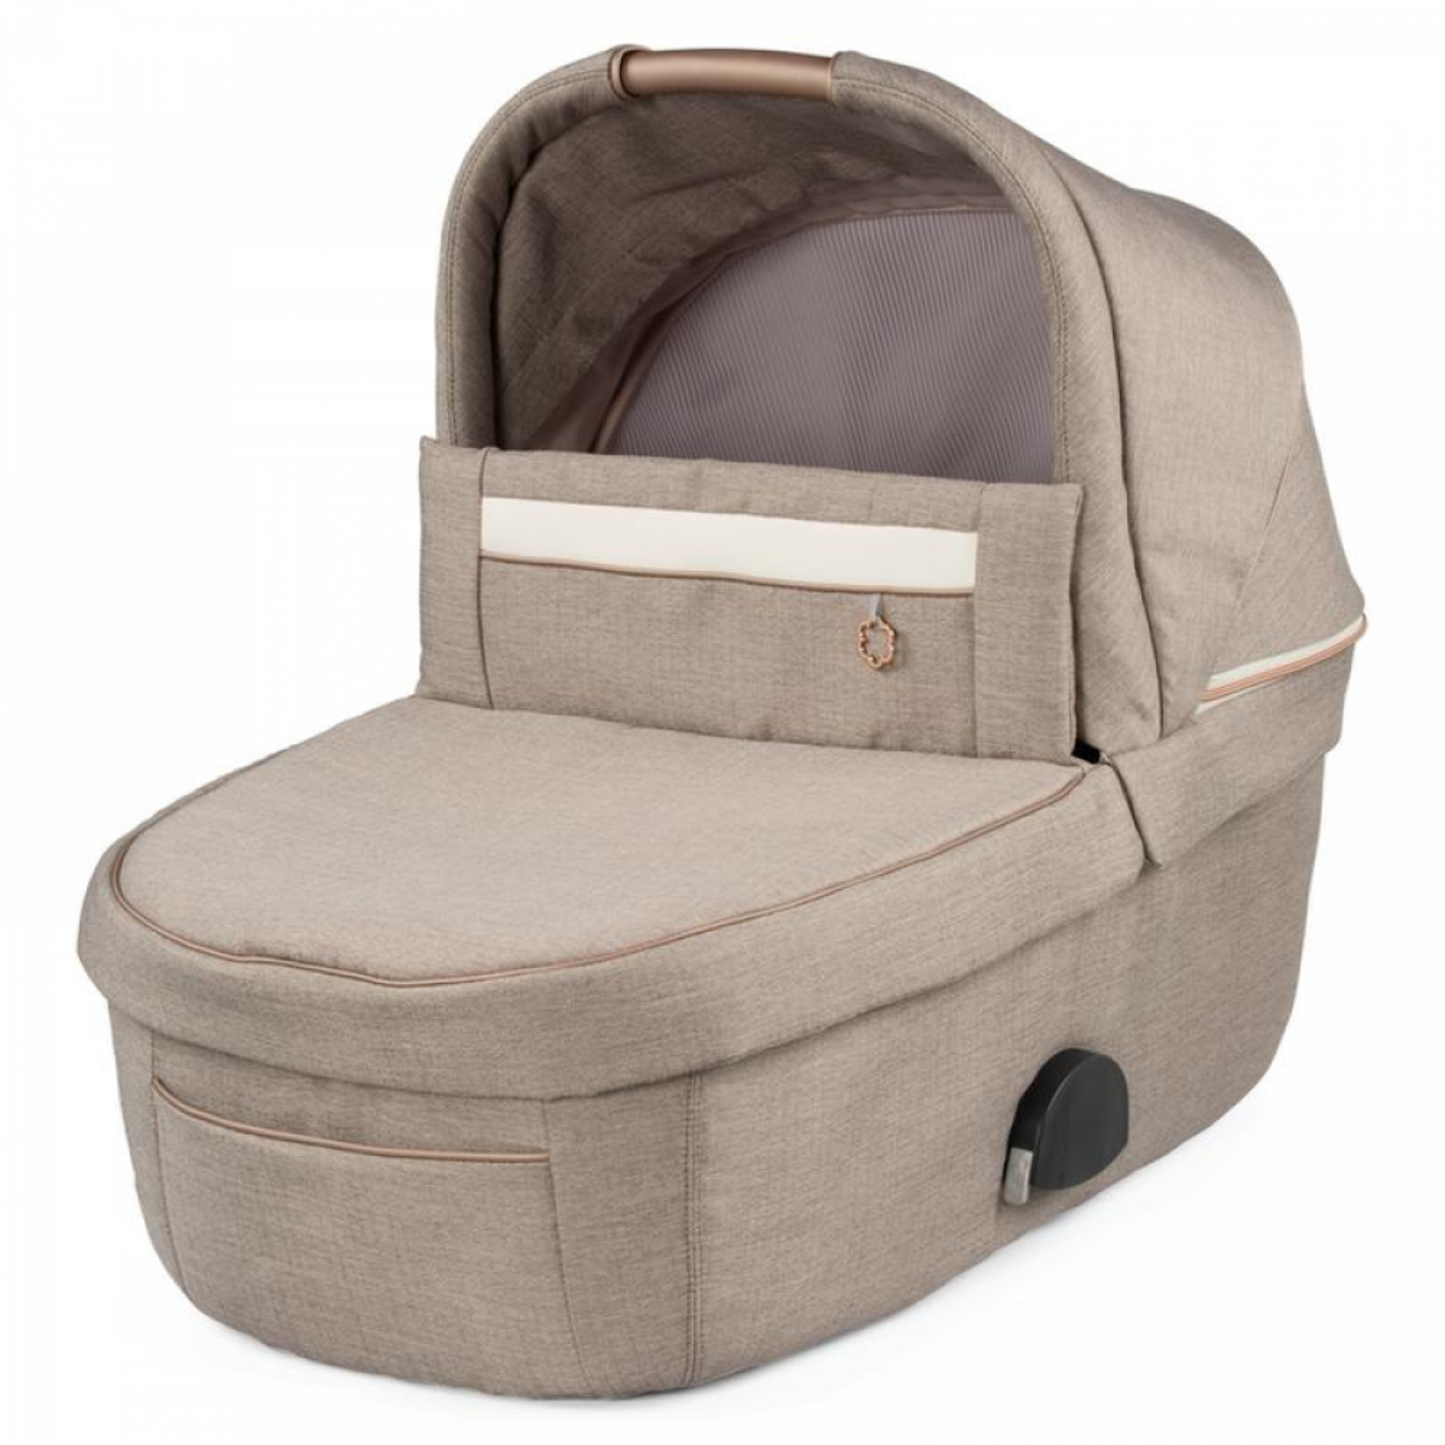 Peg Perego Grand Culla Carrycot - Mon Amour